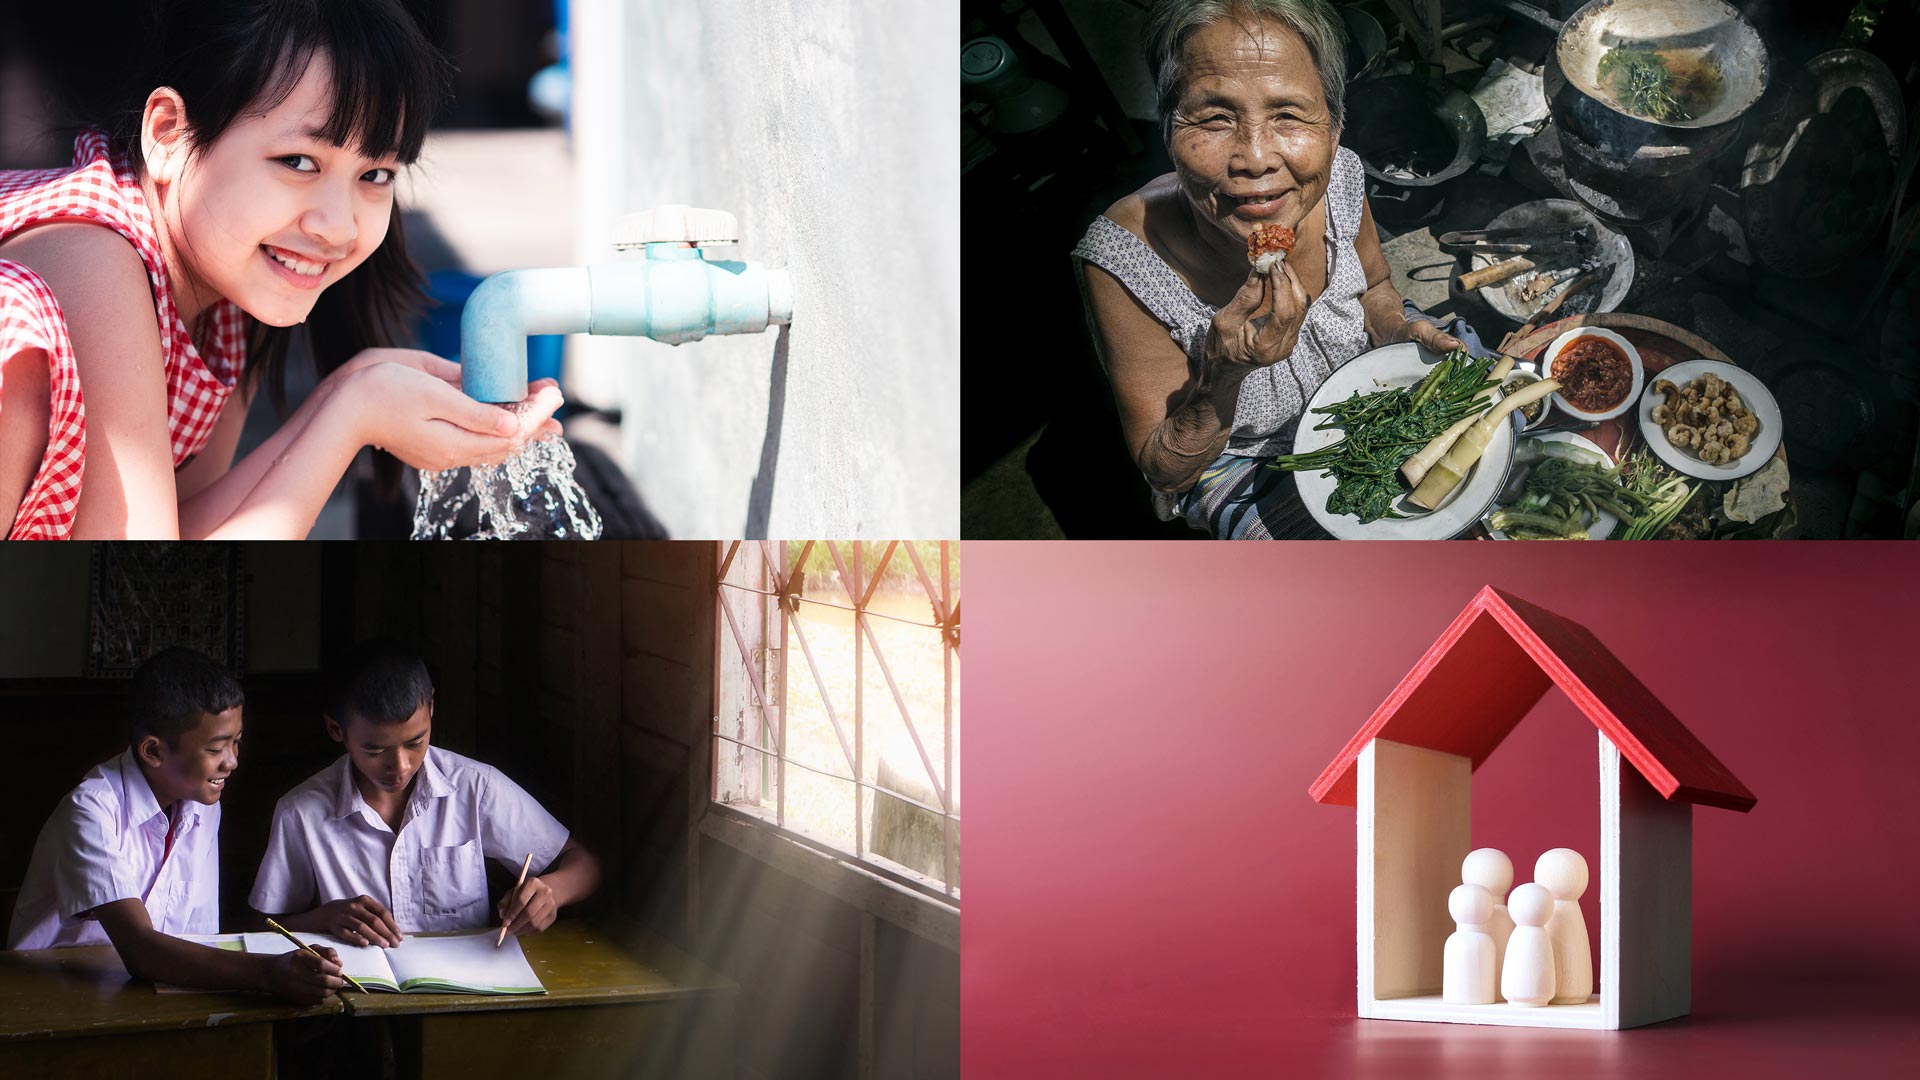 A collage of images of people depicting access to drinkable tap water, nutritious food, education and housing.